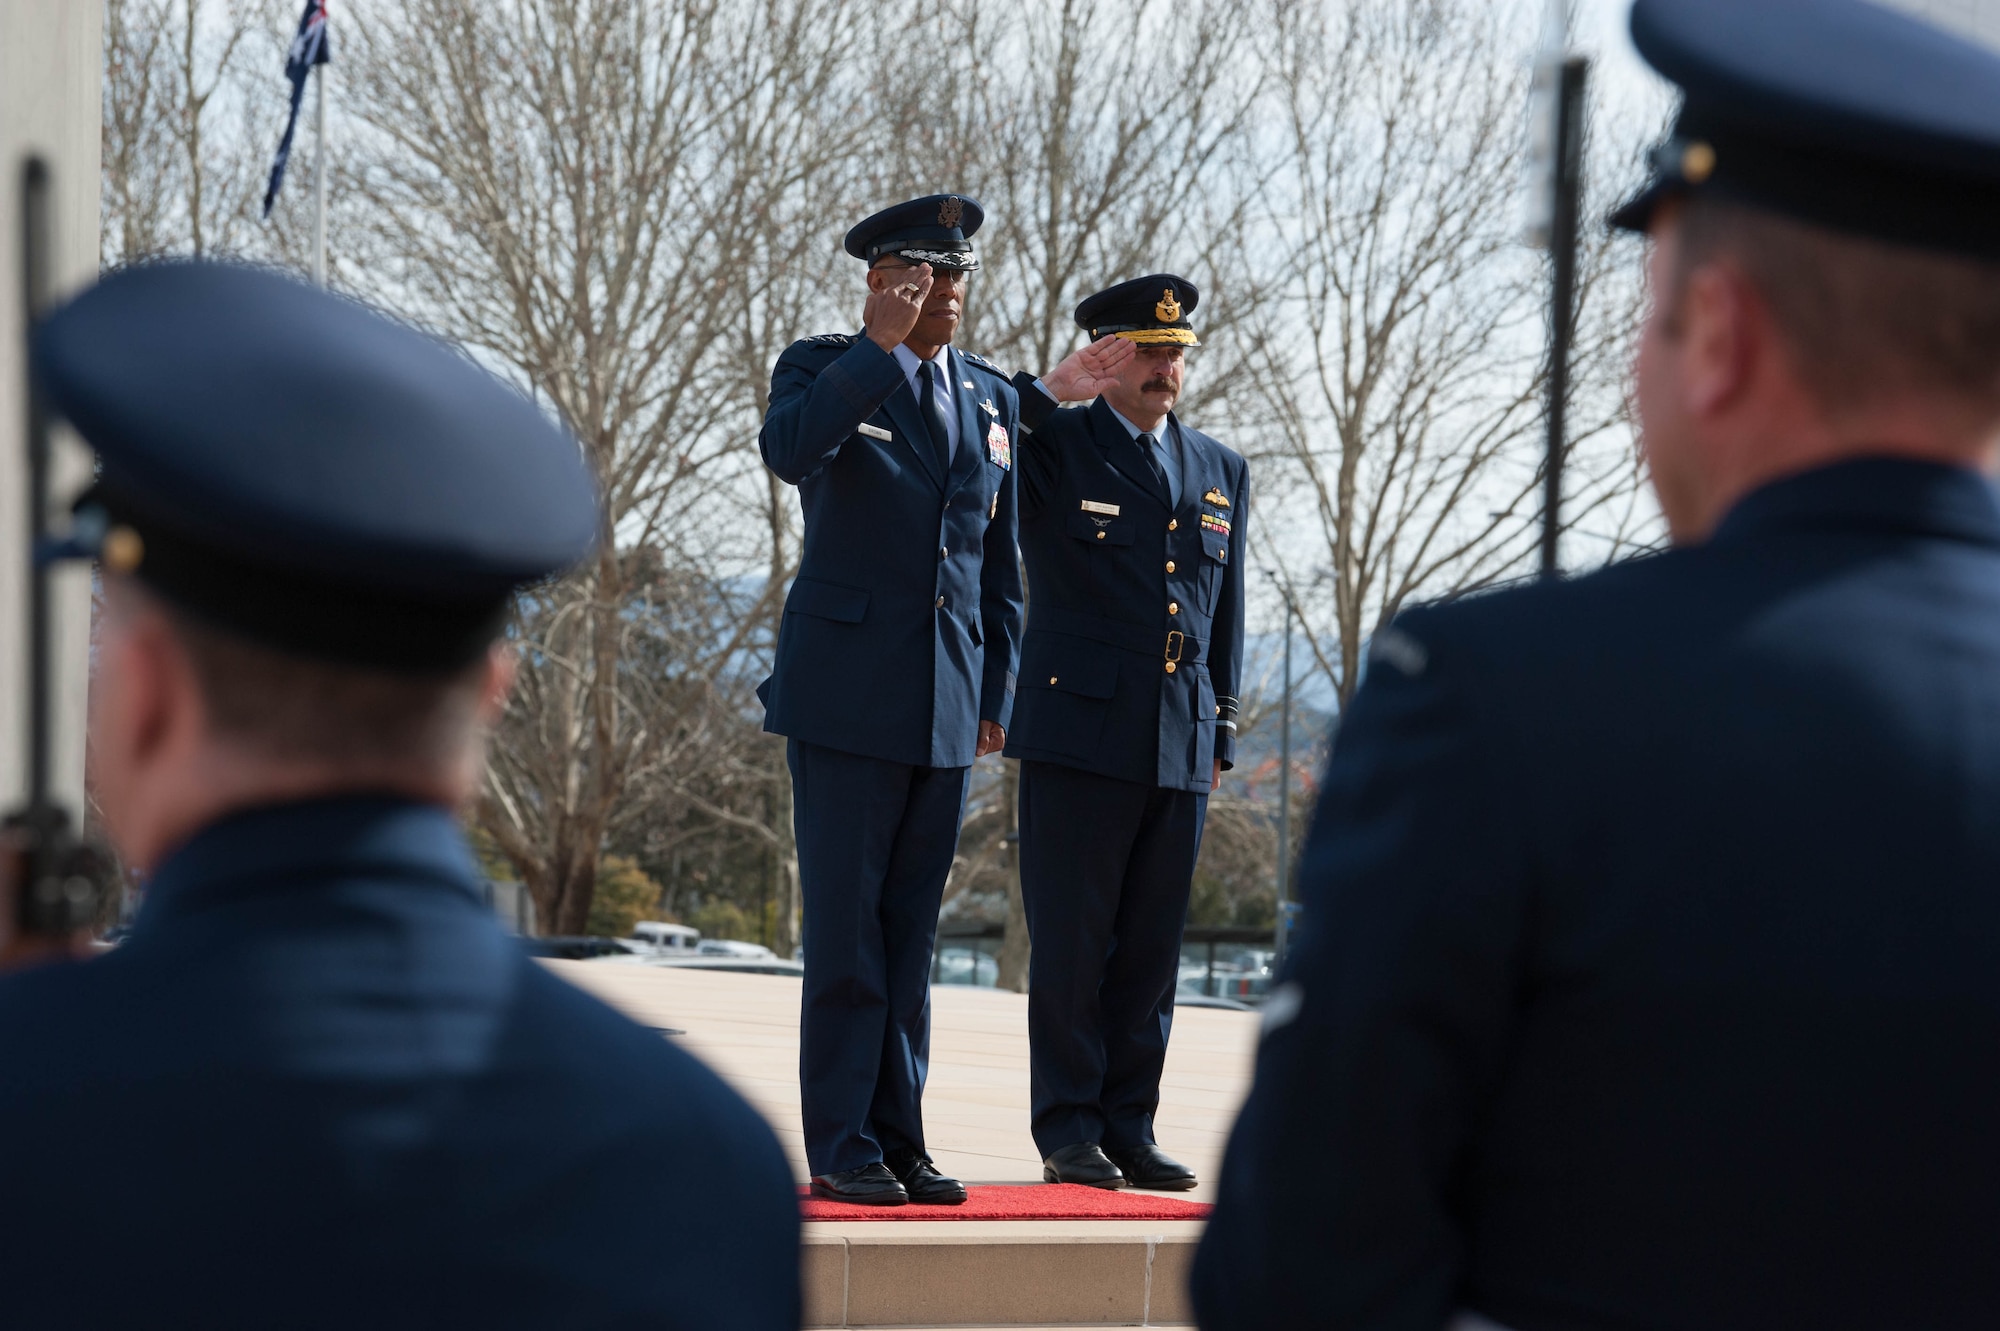 Gen. CQ Brown, Jr., Pacific Air Forces commander, and Air Marshal Leo Davies, Royal Australian Air Force (RAAF) chief of Air Force, salute Australia’s Federation Guard and band members during a ceremony at the Russell Offices, Canberra, Australia, Aug. 10, 2018. His first trip to the region since taking command on July 26, 2018, Brown met with key defense and military leaders in Canberra and RAAF Bases Williamtown, Tindal and Darwin to see first-hand the strength of the U.S.-Australia alliance and discuss opportunities to ensure a free and open Indo-Pacific region. (U.S. Air Force photo by Staff Sgt. Hailey Haux)